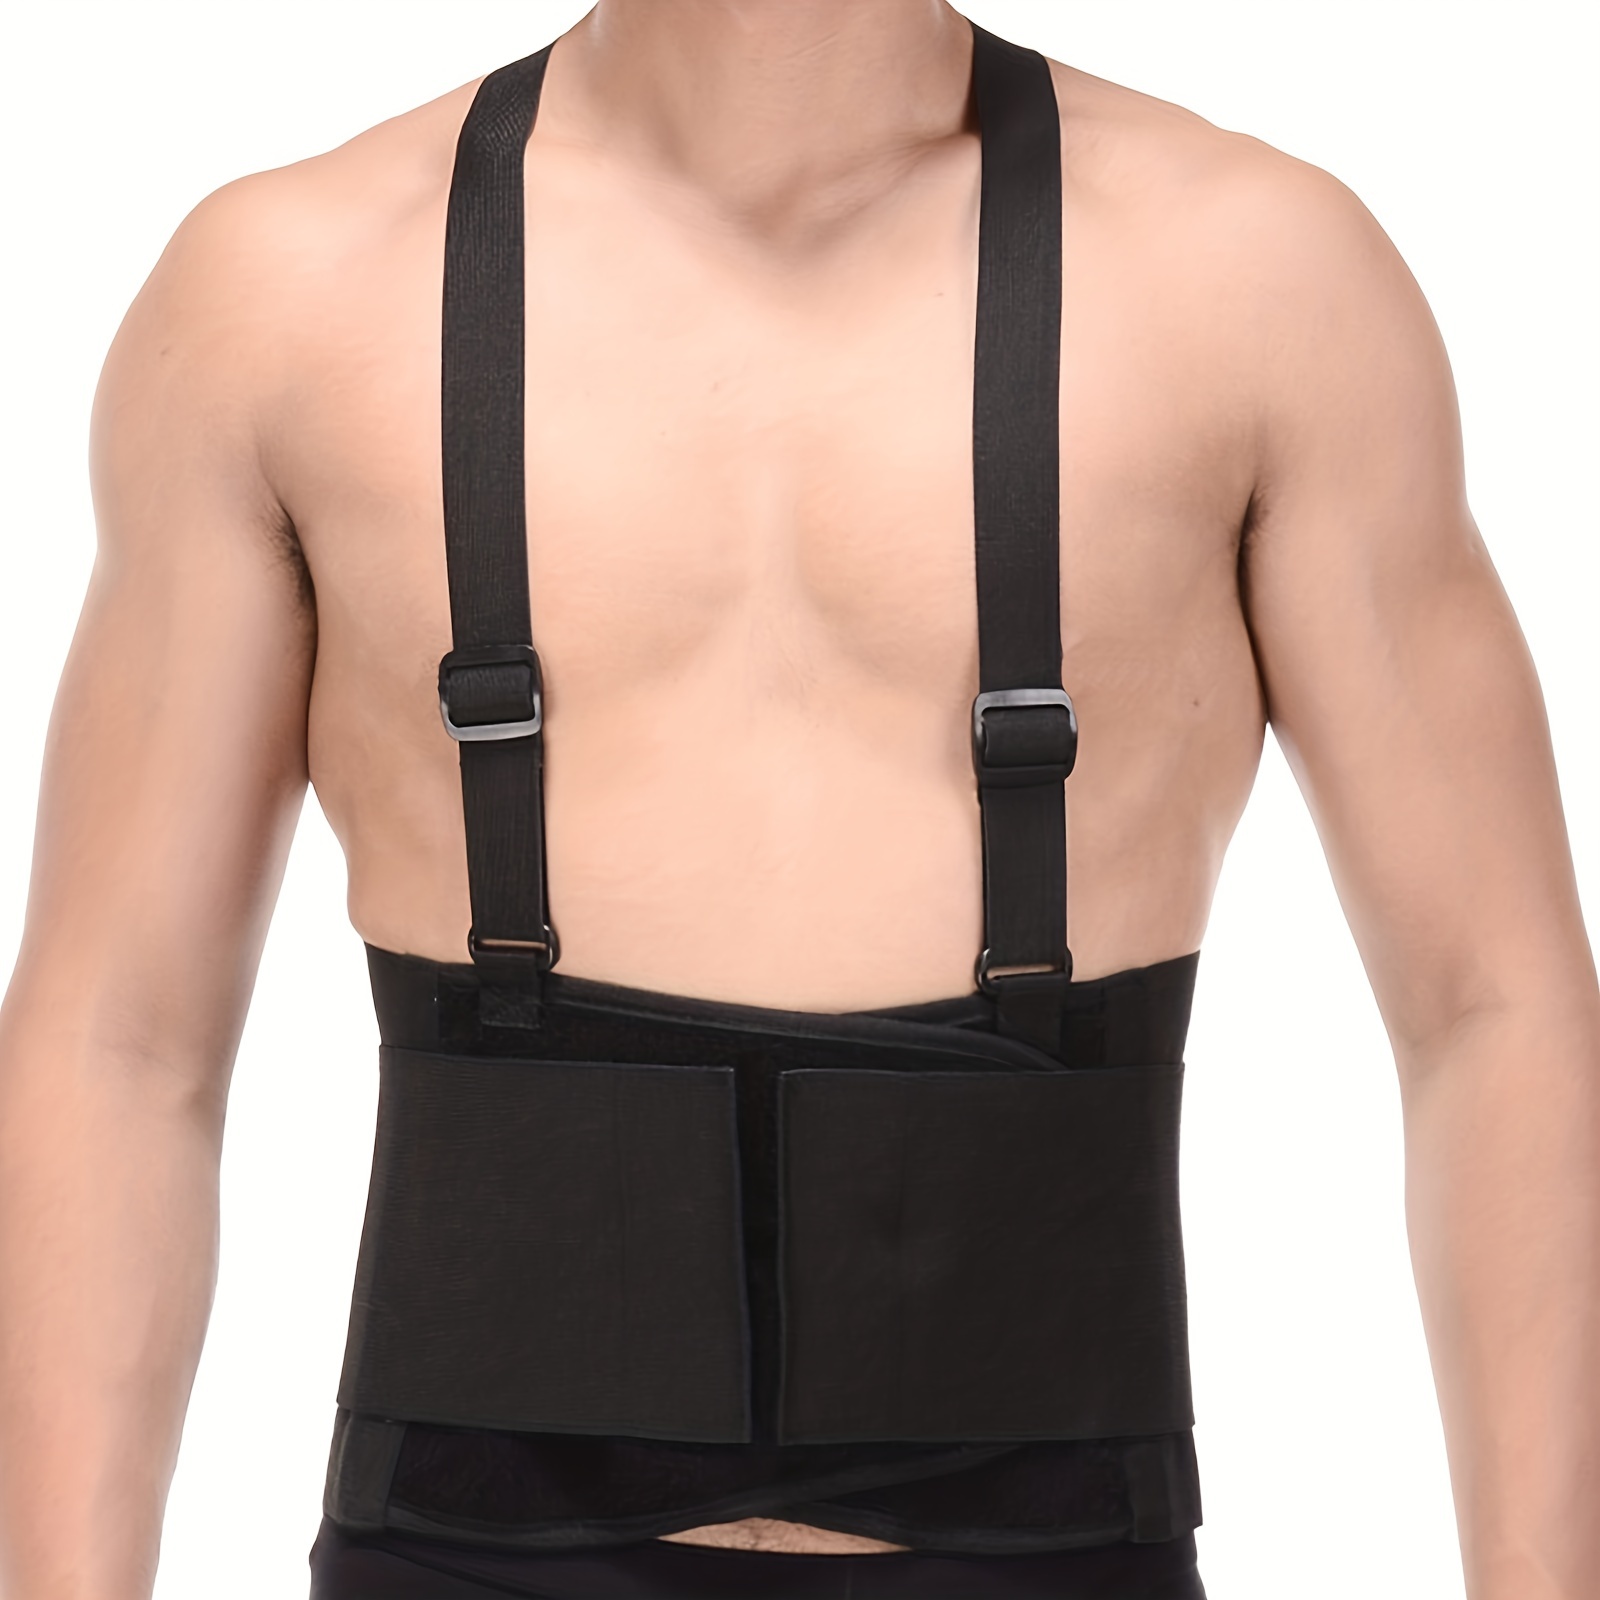 Lower Back Brace Lumbar Support Belt With Adjustable Straps For Pain Relief